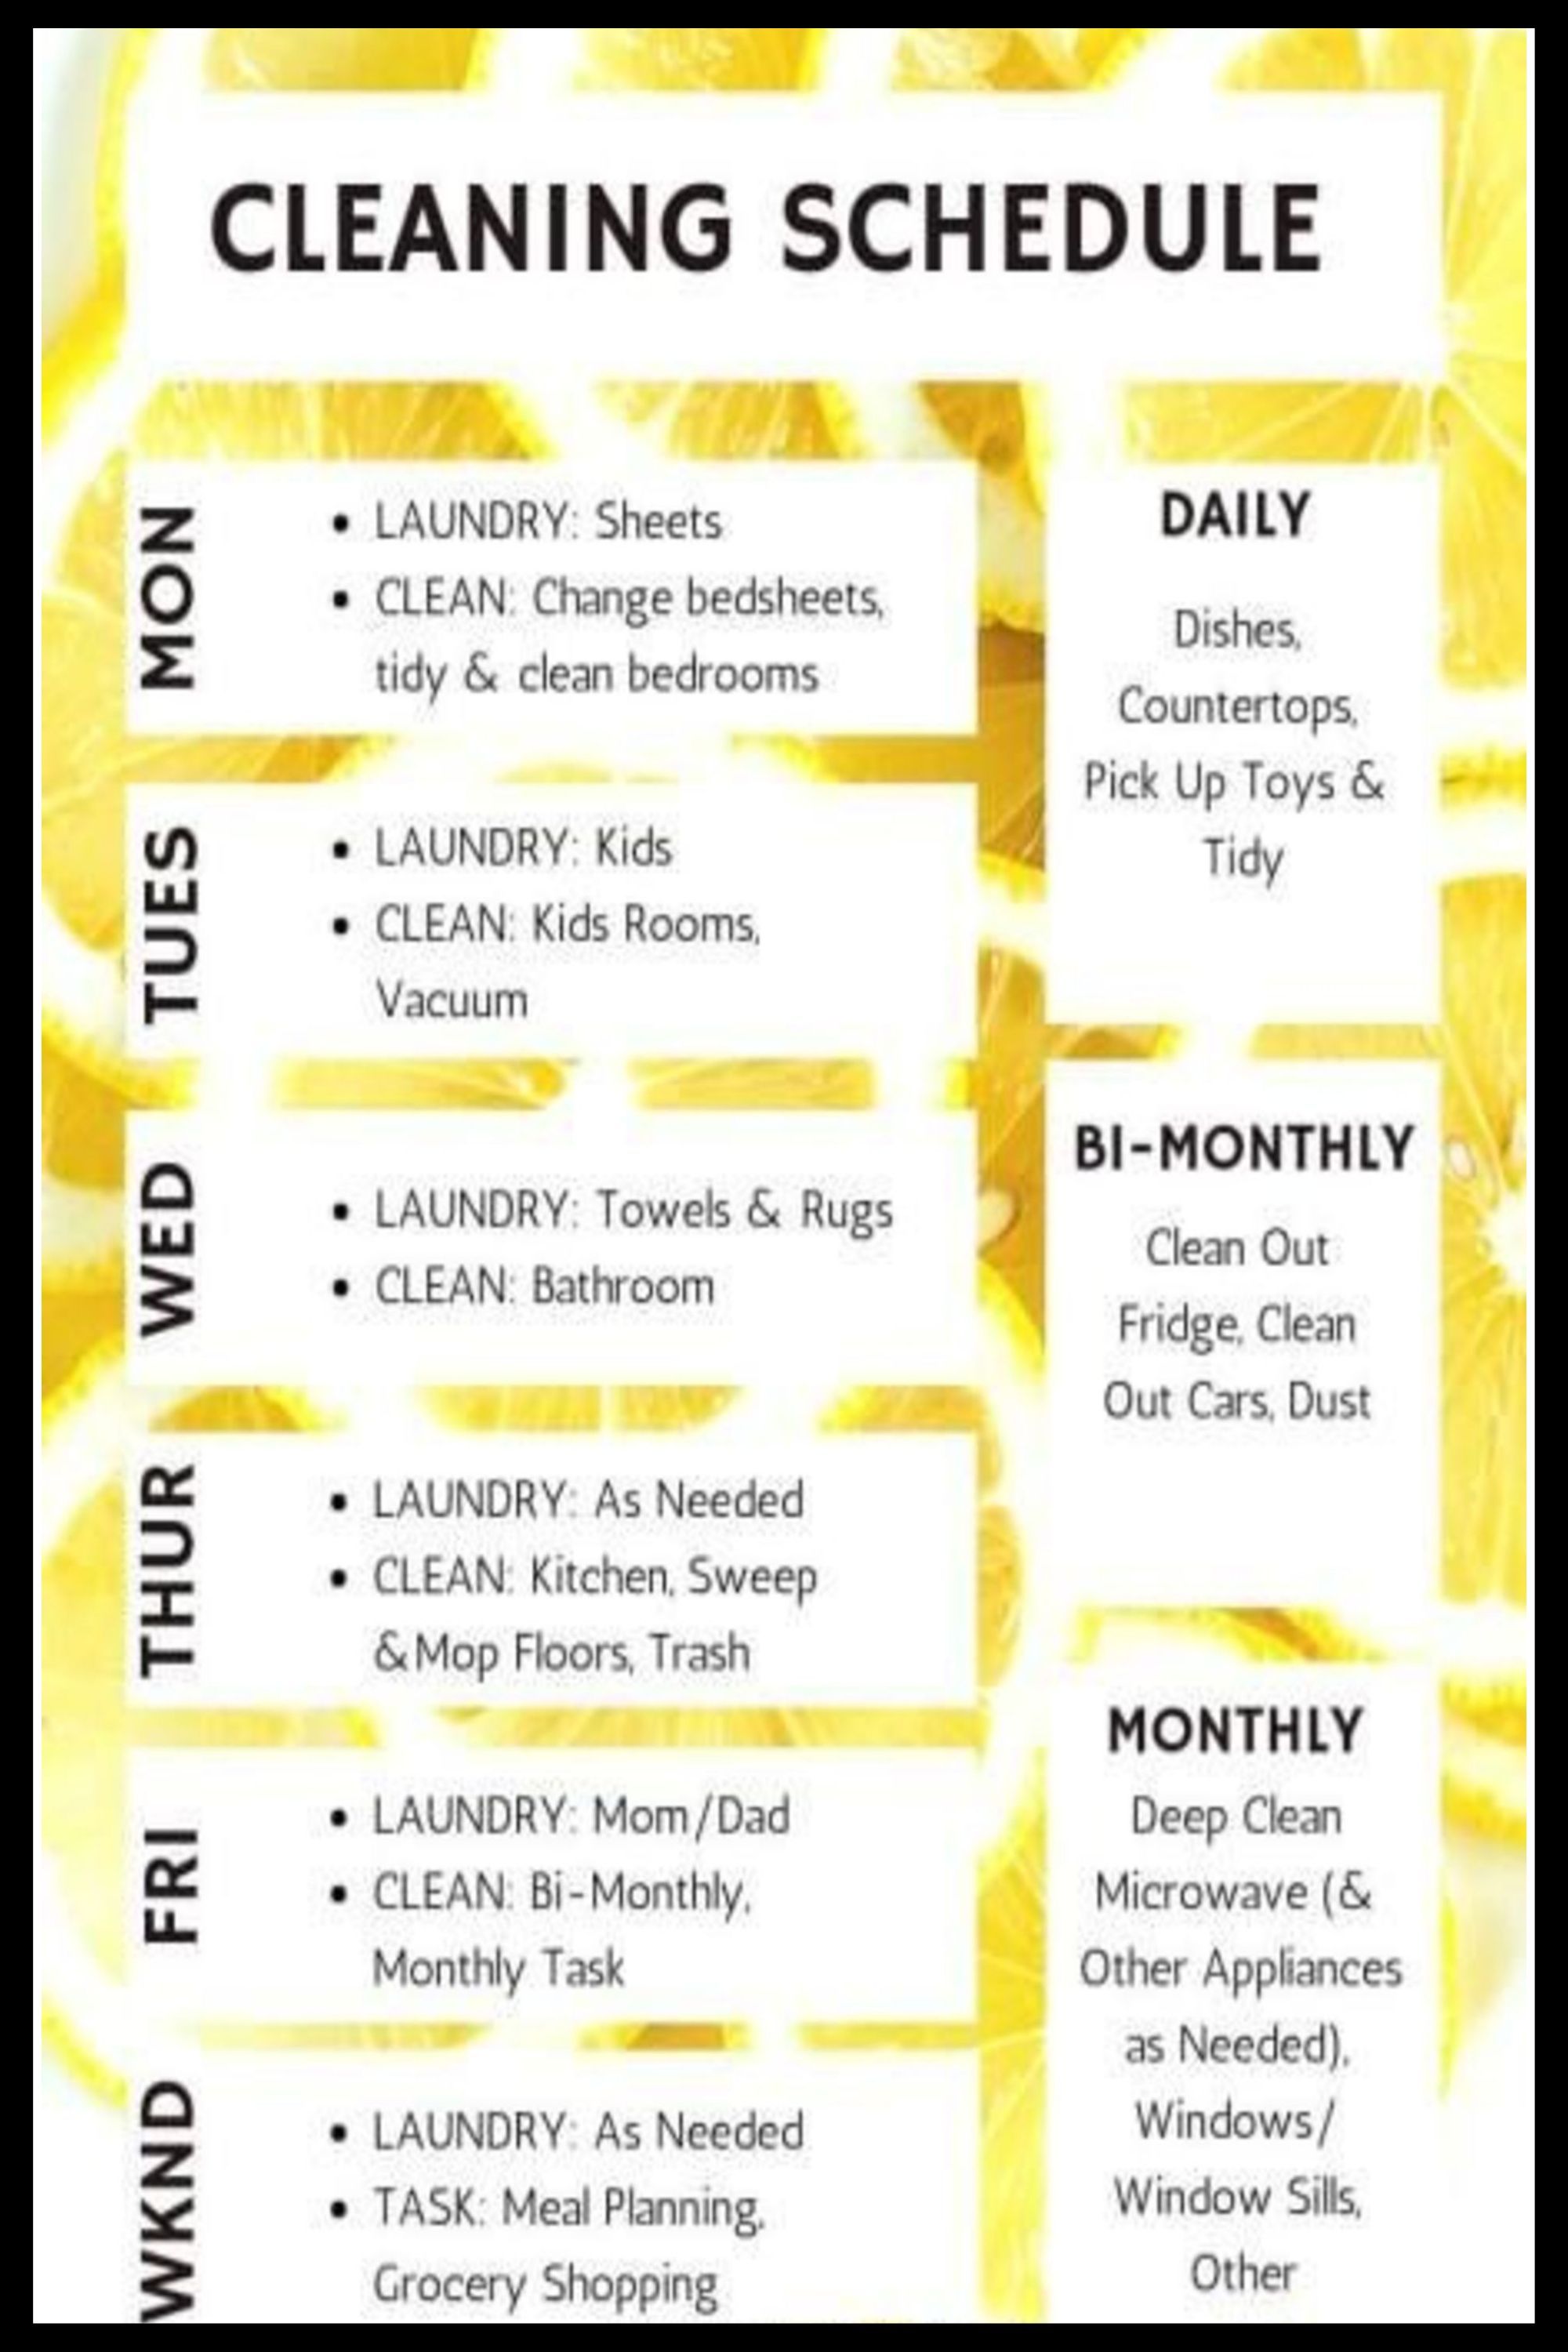 Cleaning Schedules & Checklists (Daily, Weekly, Monthly House Cleaning Chores Lists) -   10 room decor Simple clean ideas